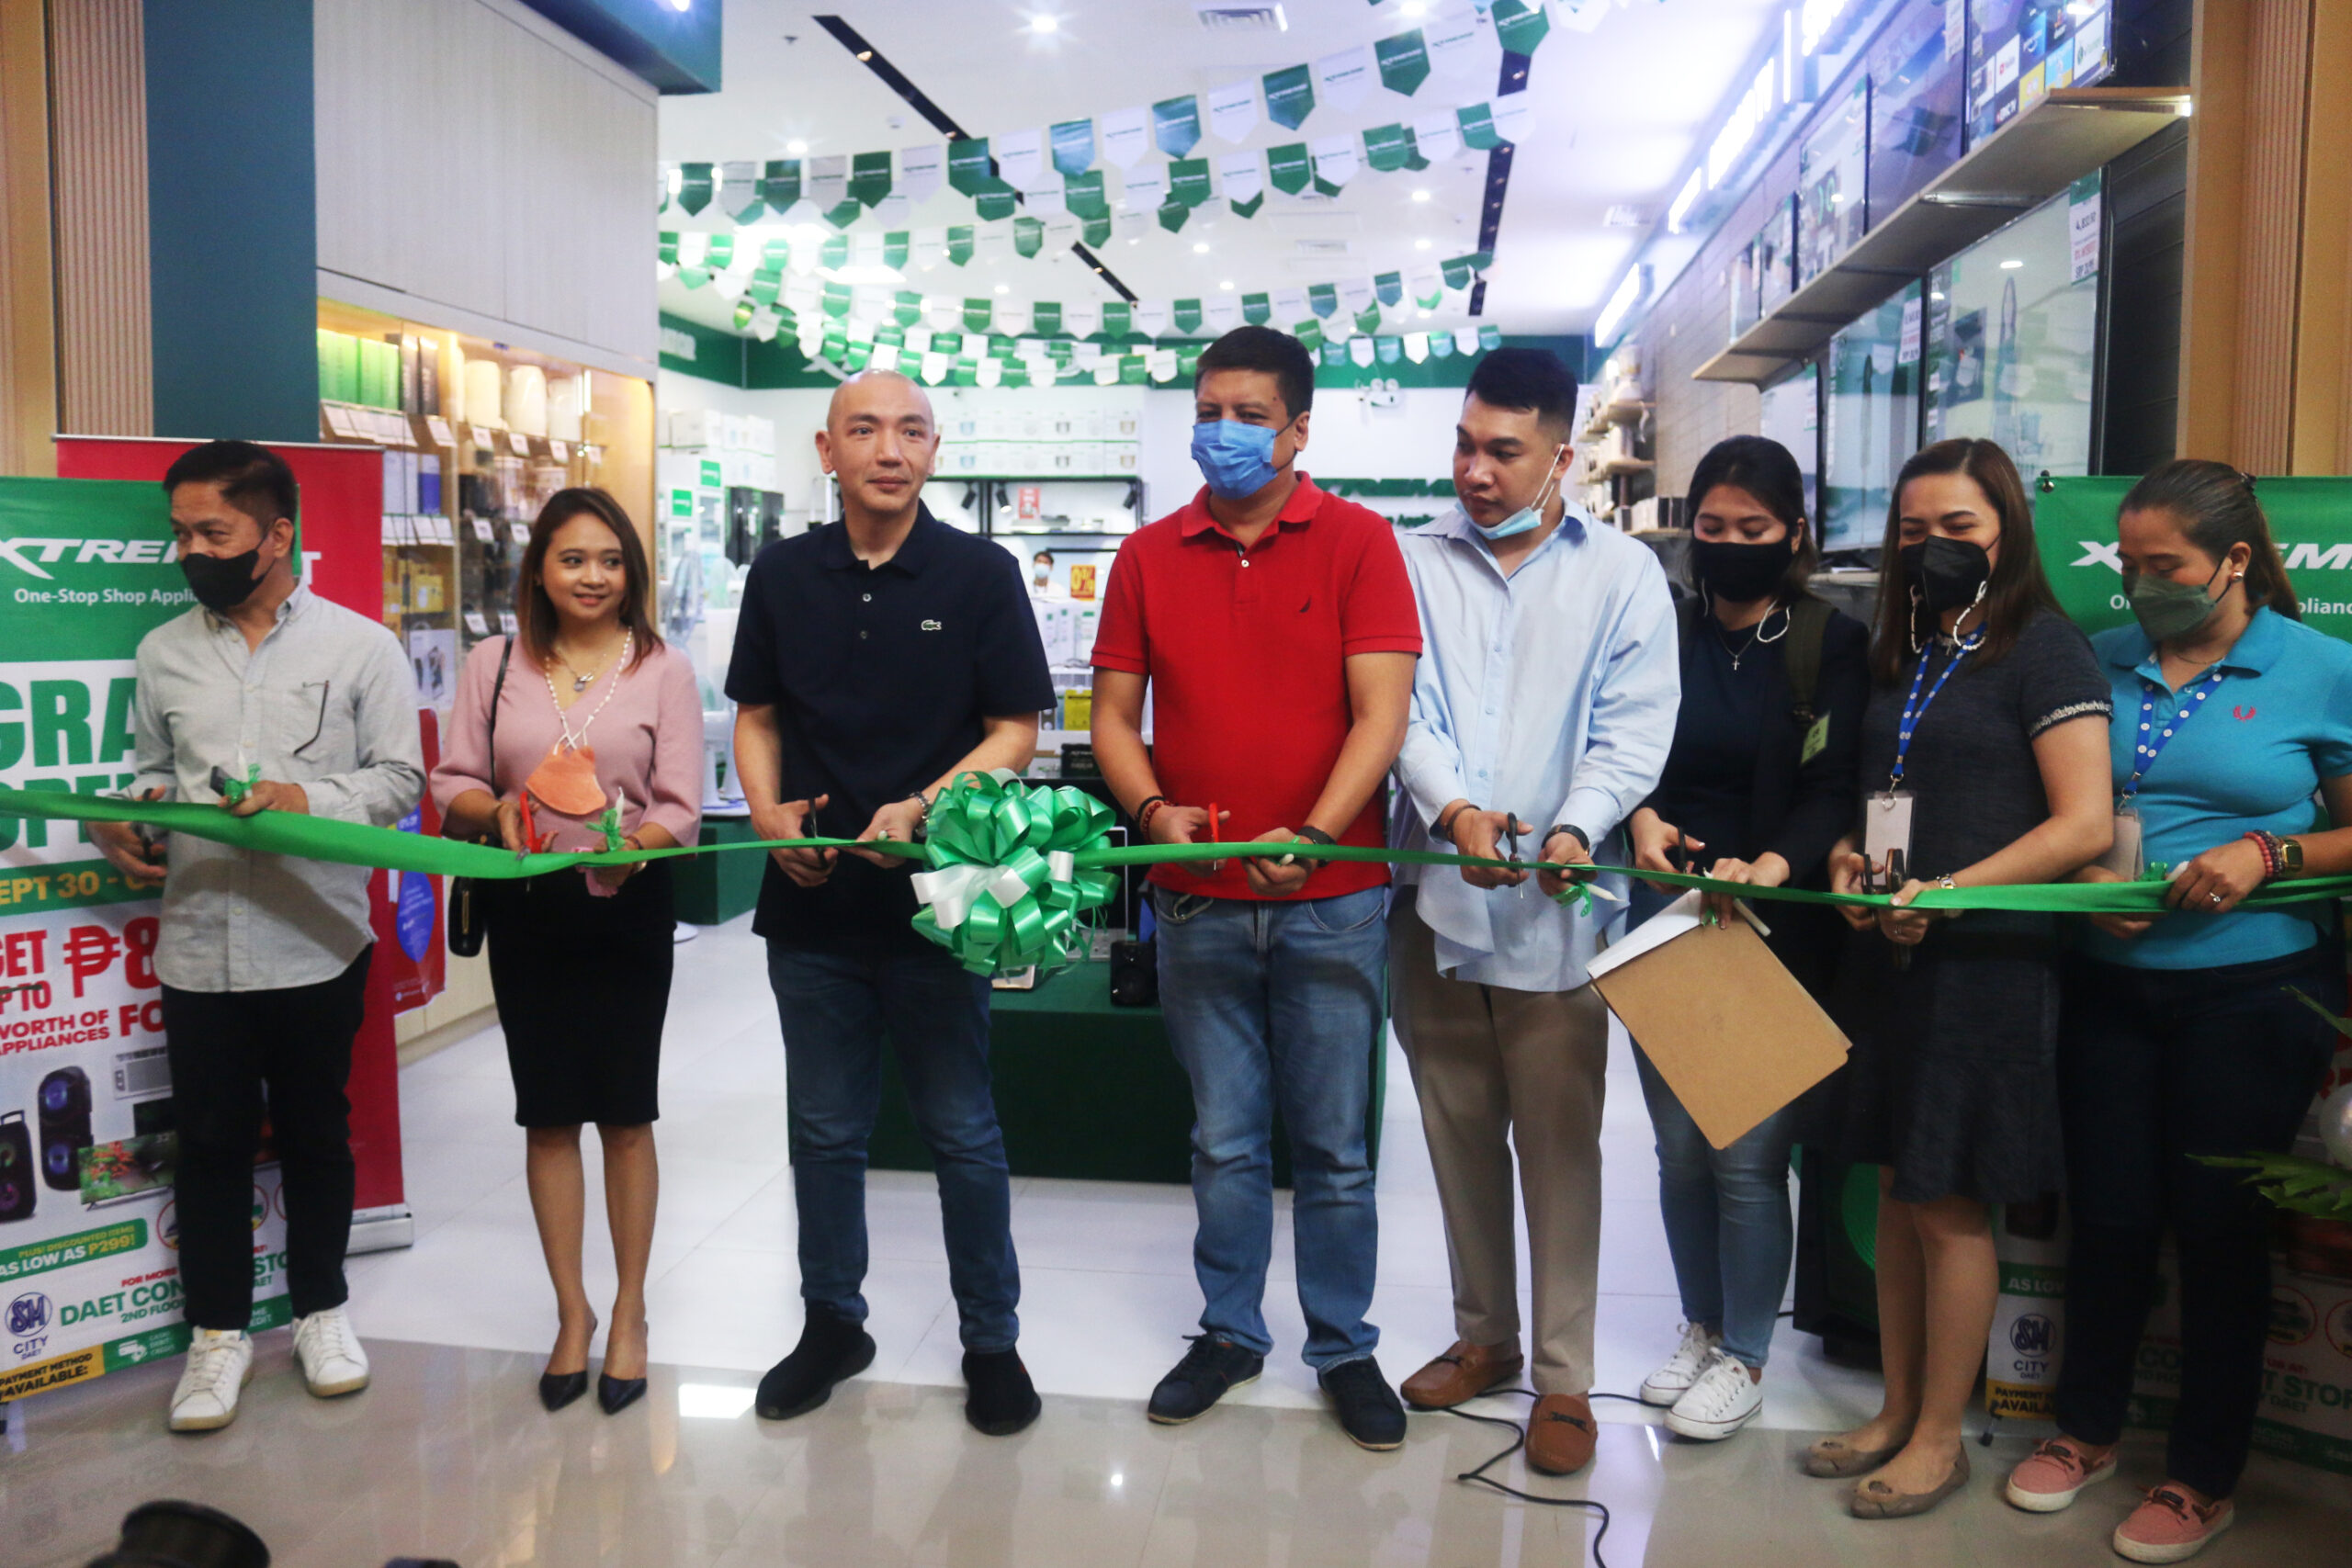 XTREME Appliances opens its first SM Concept Store branch in Camarines Norte